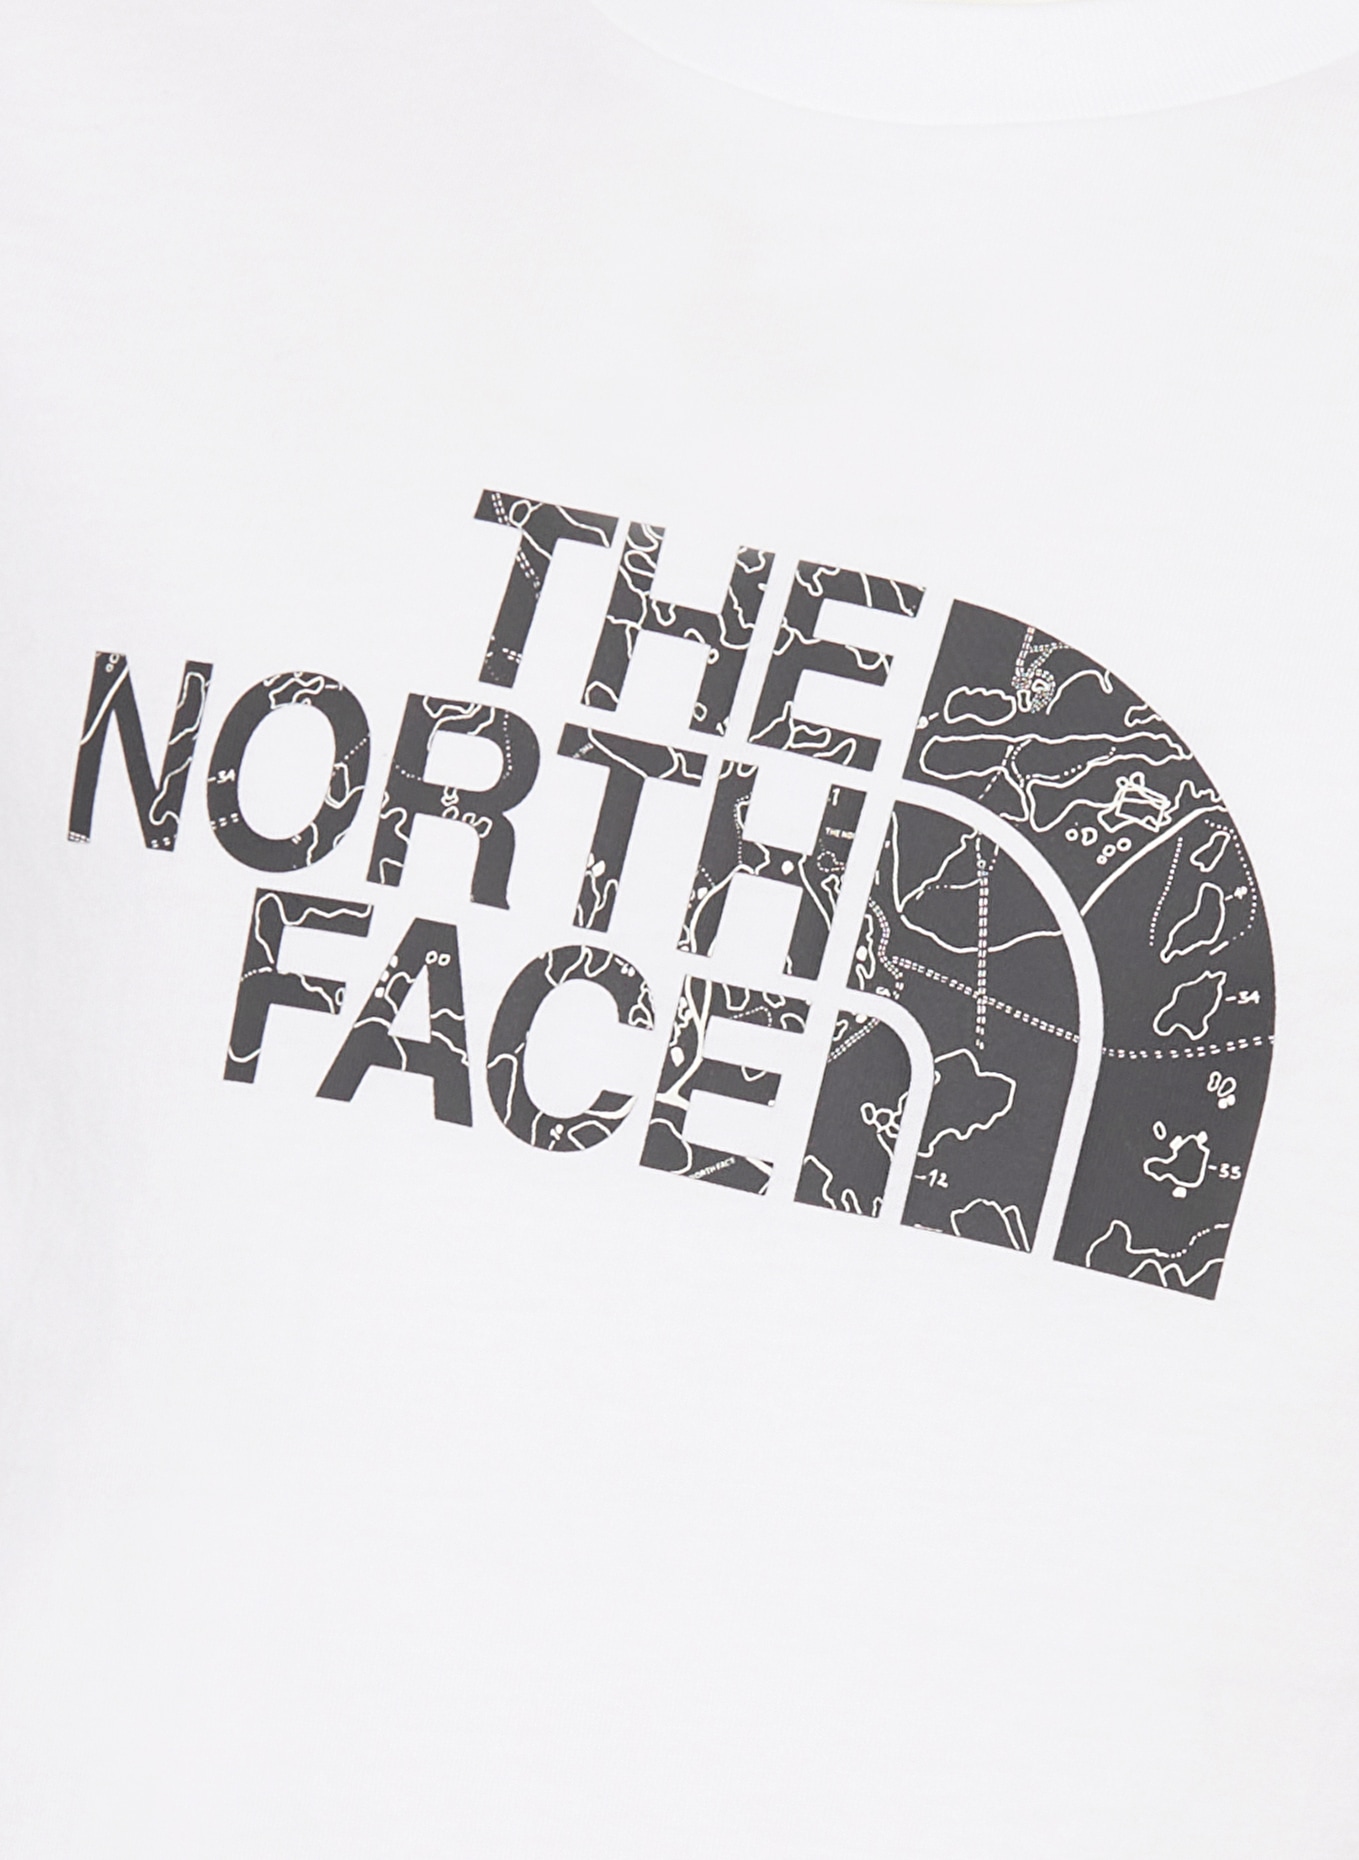 THE NORTH FACE T-Shirt, Farbe: WEISS (Bild 3)